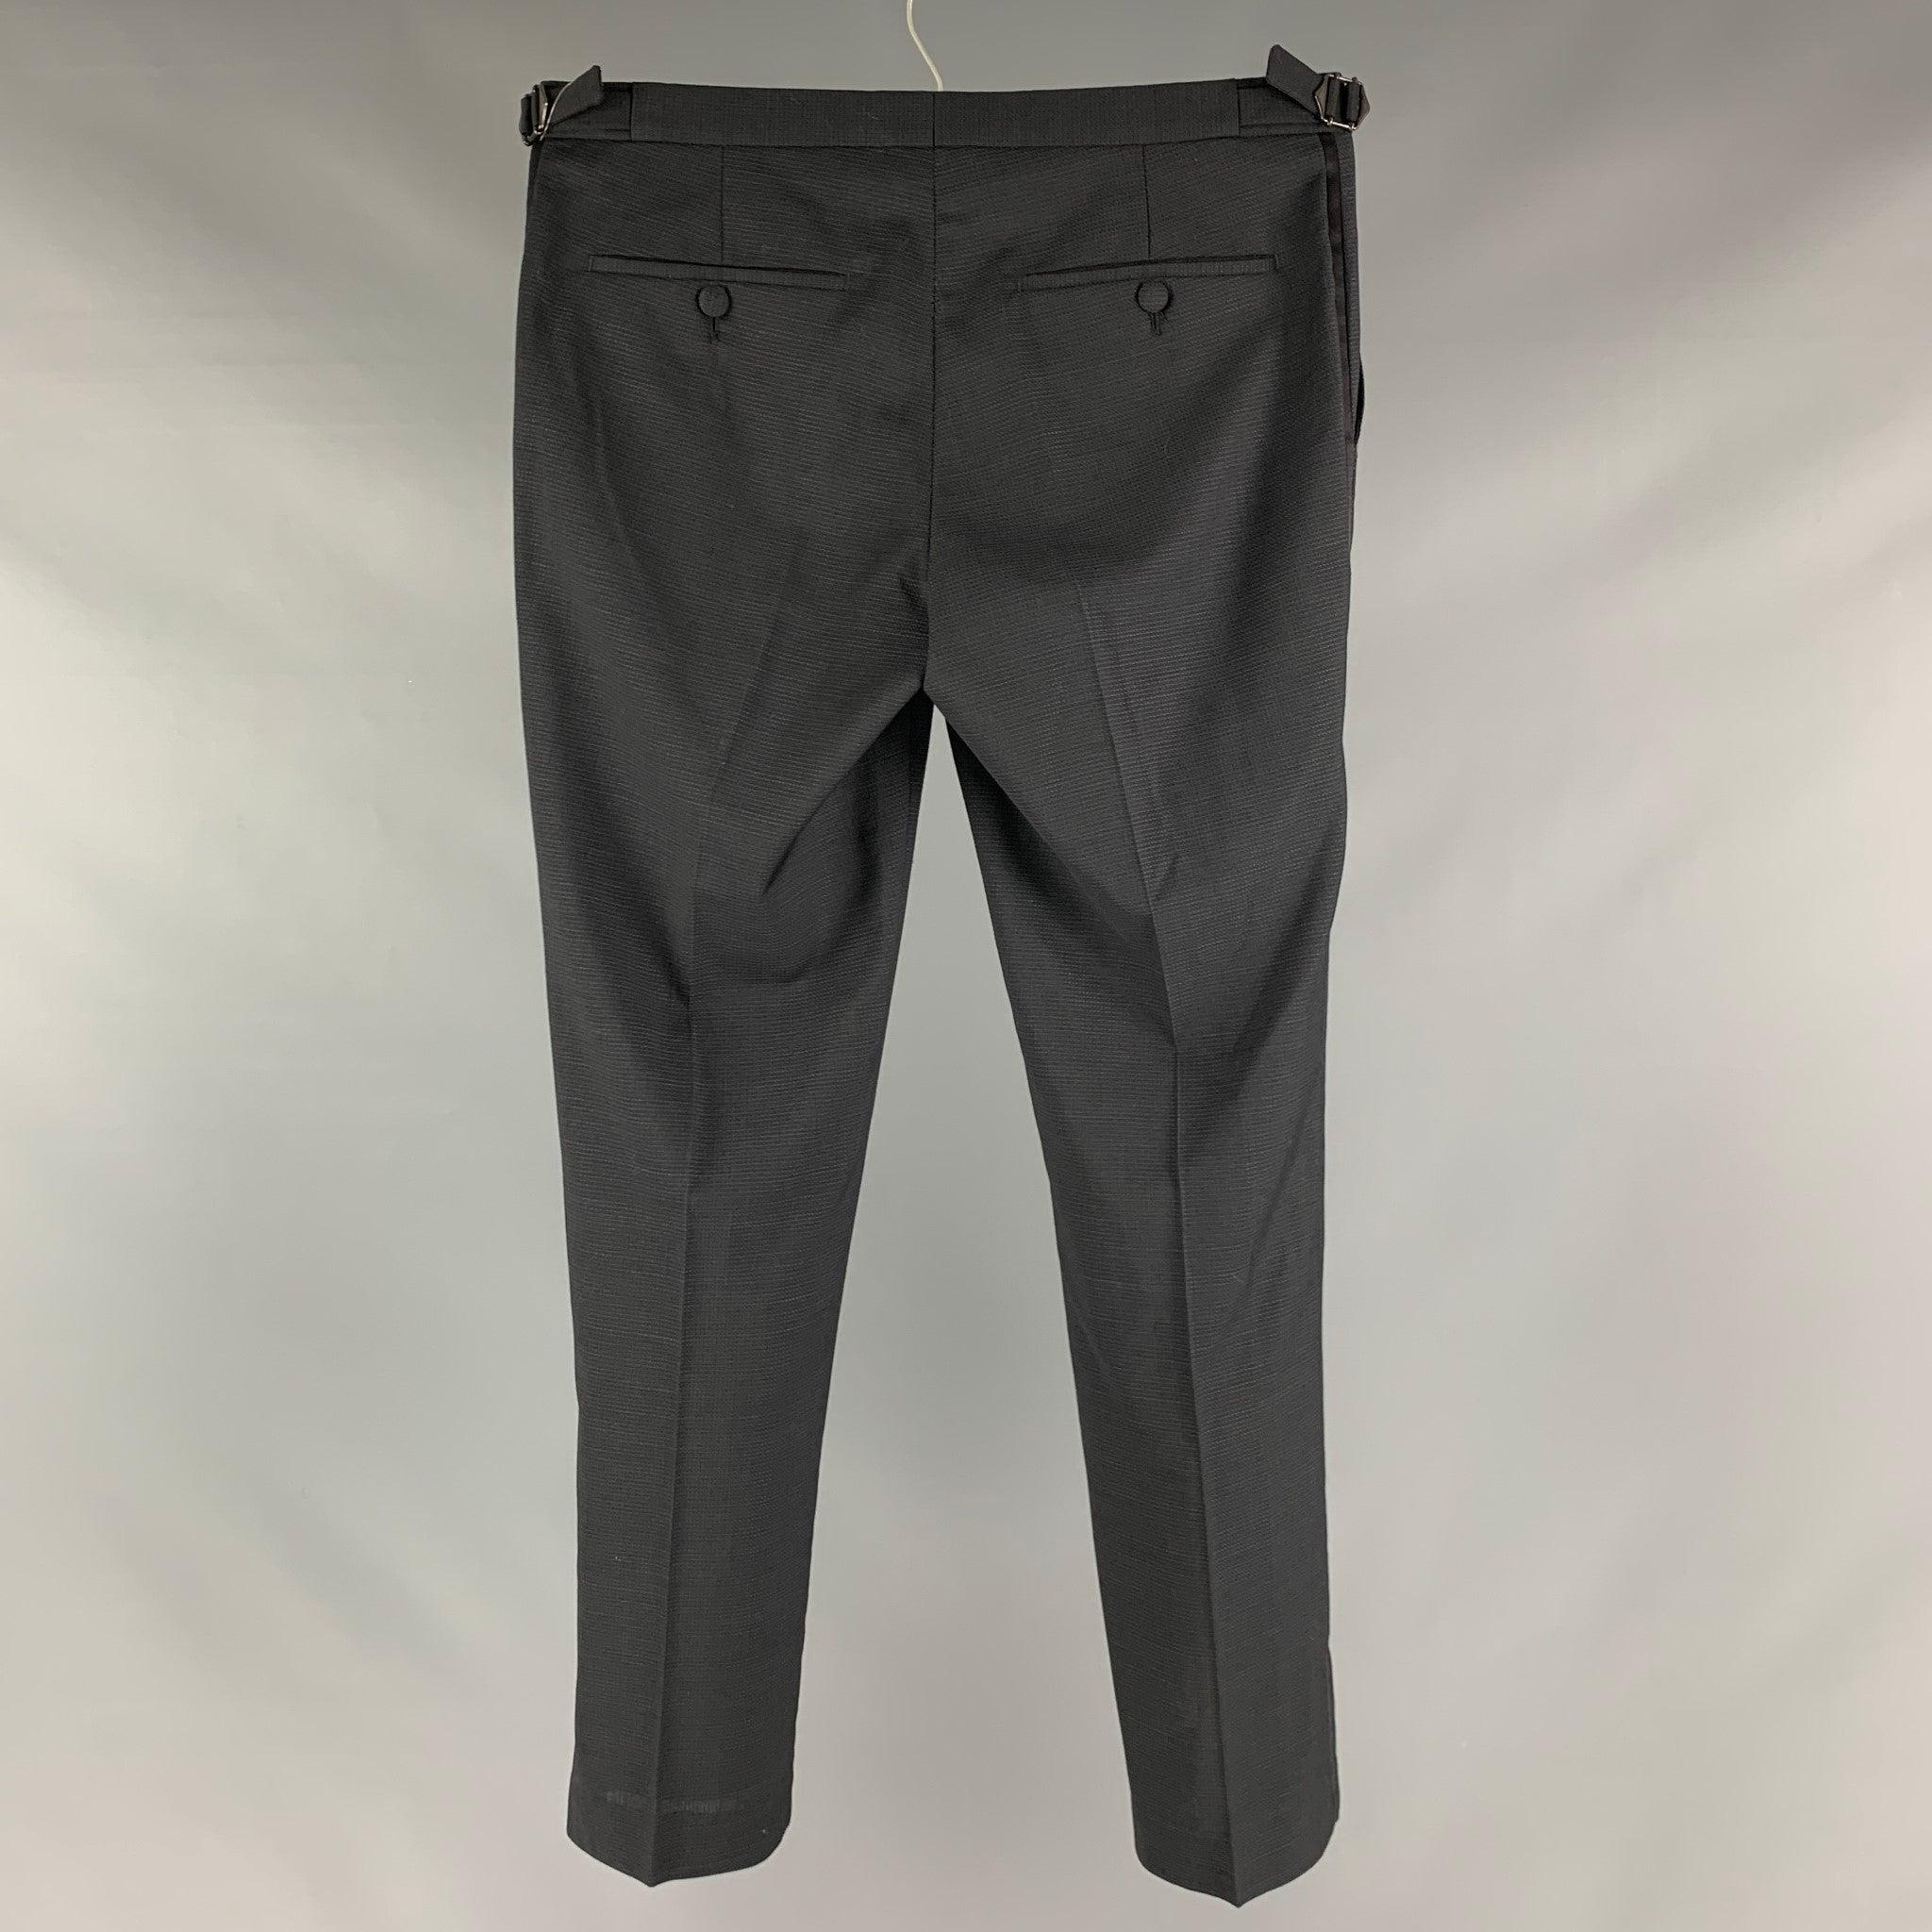 THE KOOPLES dress pants comes in a black wool woven material featuring a regular fit, side tabs, and zipper fly closure. Excellent Pre-Owned Condition. 

Marked:  46 

Measurements: 
 Waist: 30 inches Rise: 7.5 inches Inseam: 29 inches 
 
 
